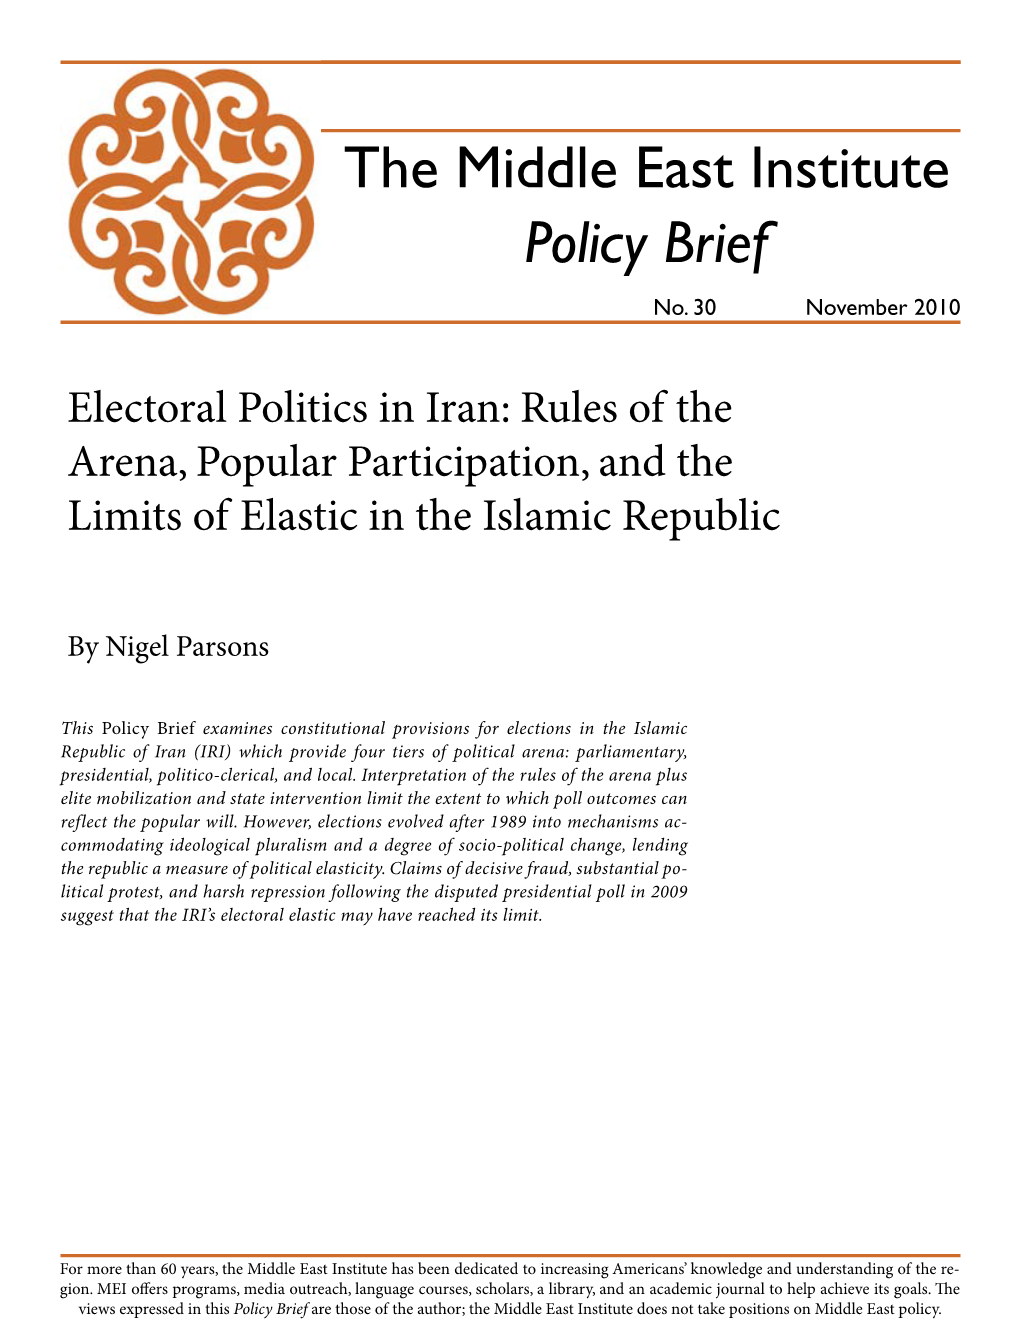 The Middle East Institute Policy Brief No